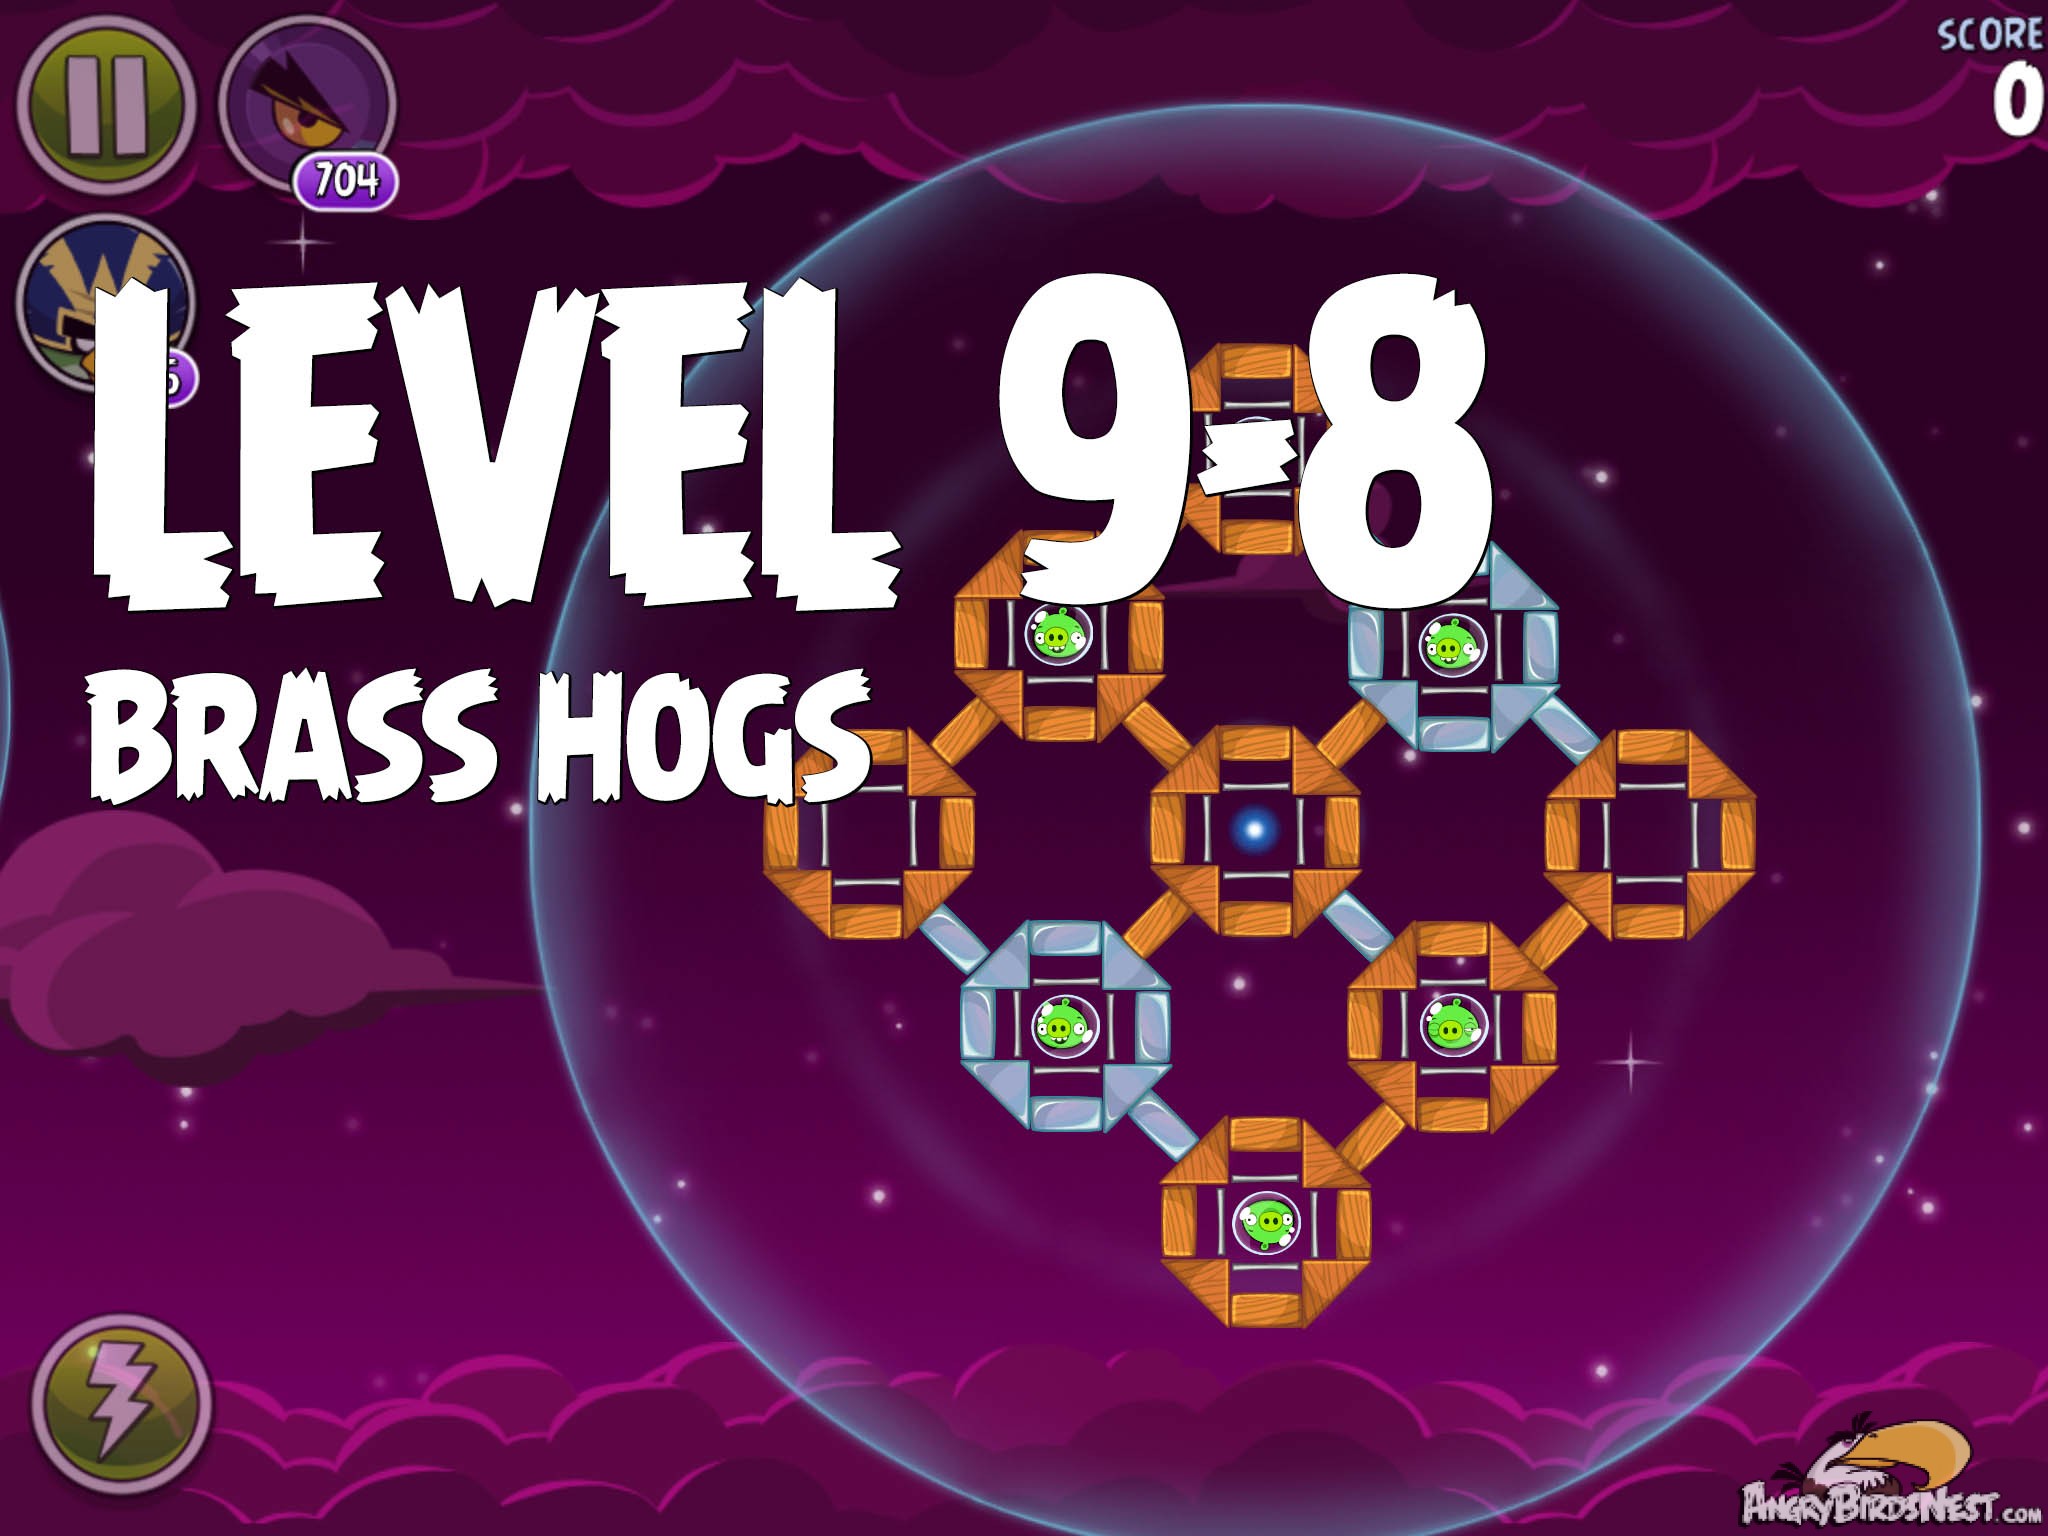 Angry Birds Space Brass Hogs Level 9-8